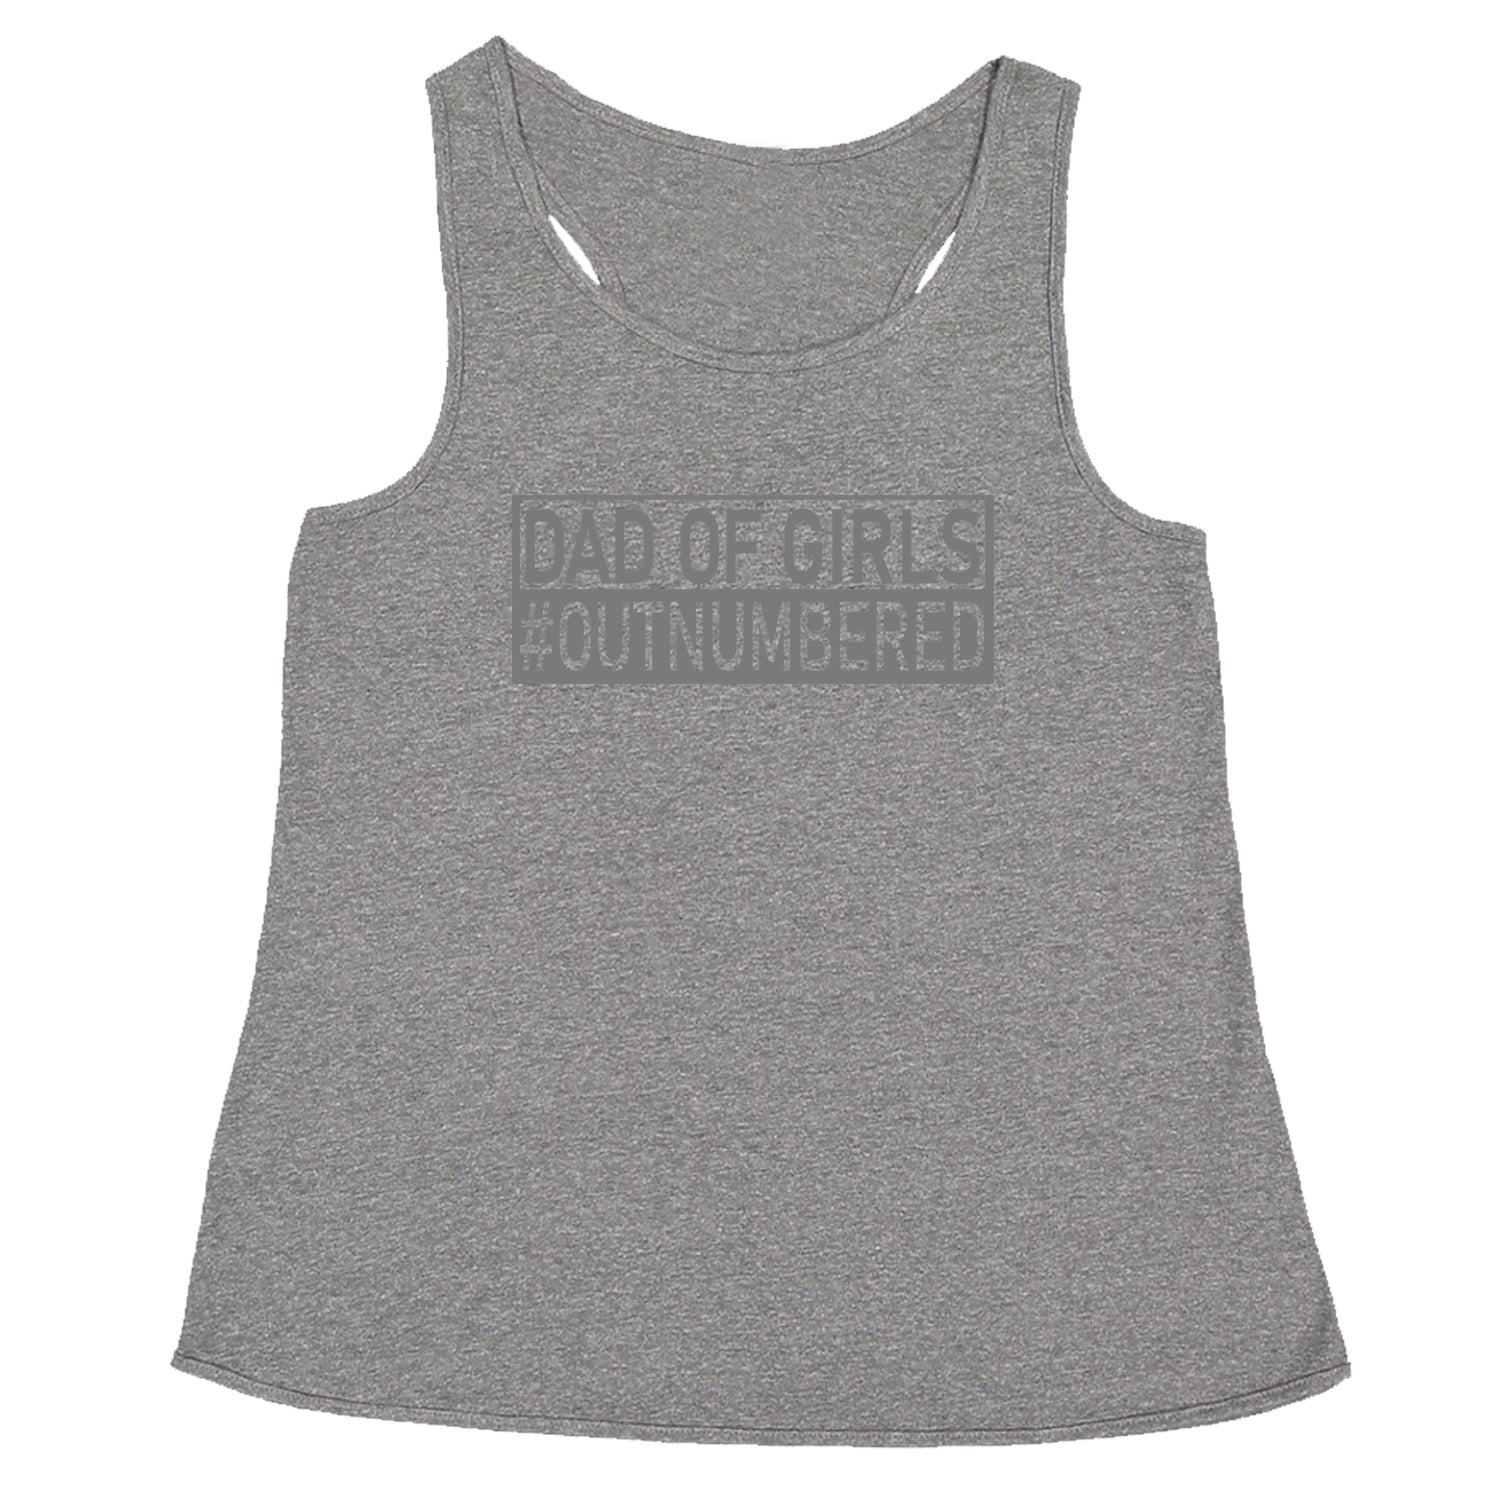 Dad of Girls Shirt for Fathers Day Gift Racerback Tank Top for Women dad, day, fathers, papa, pop by Expression Tees